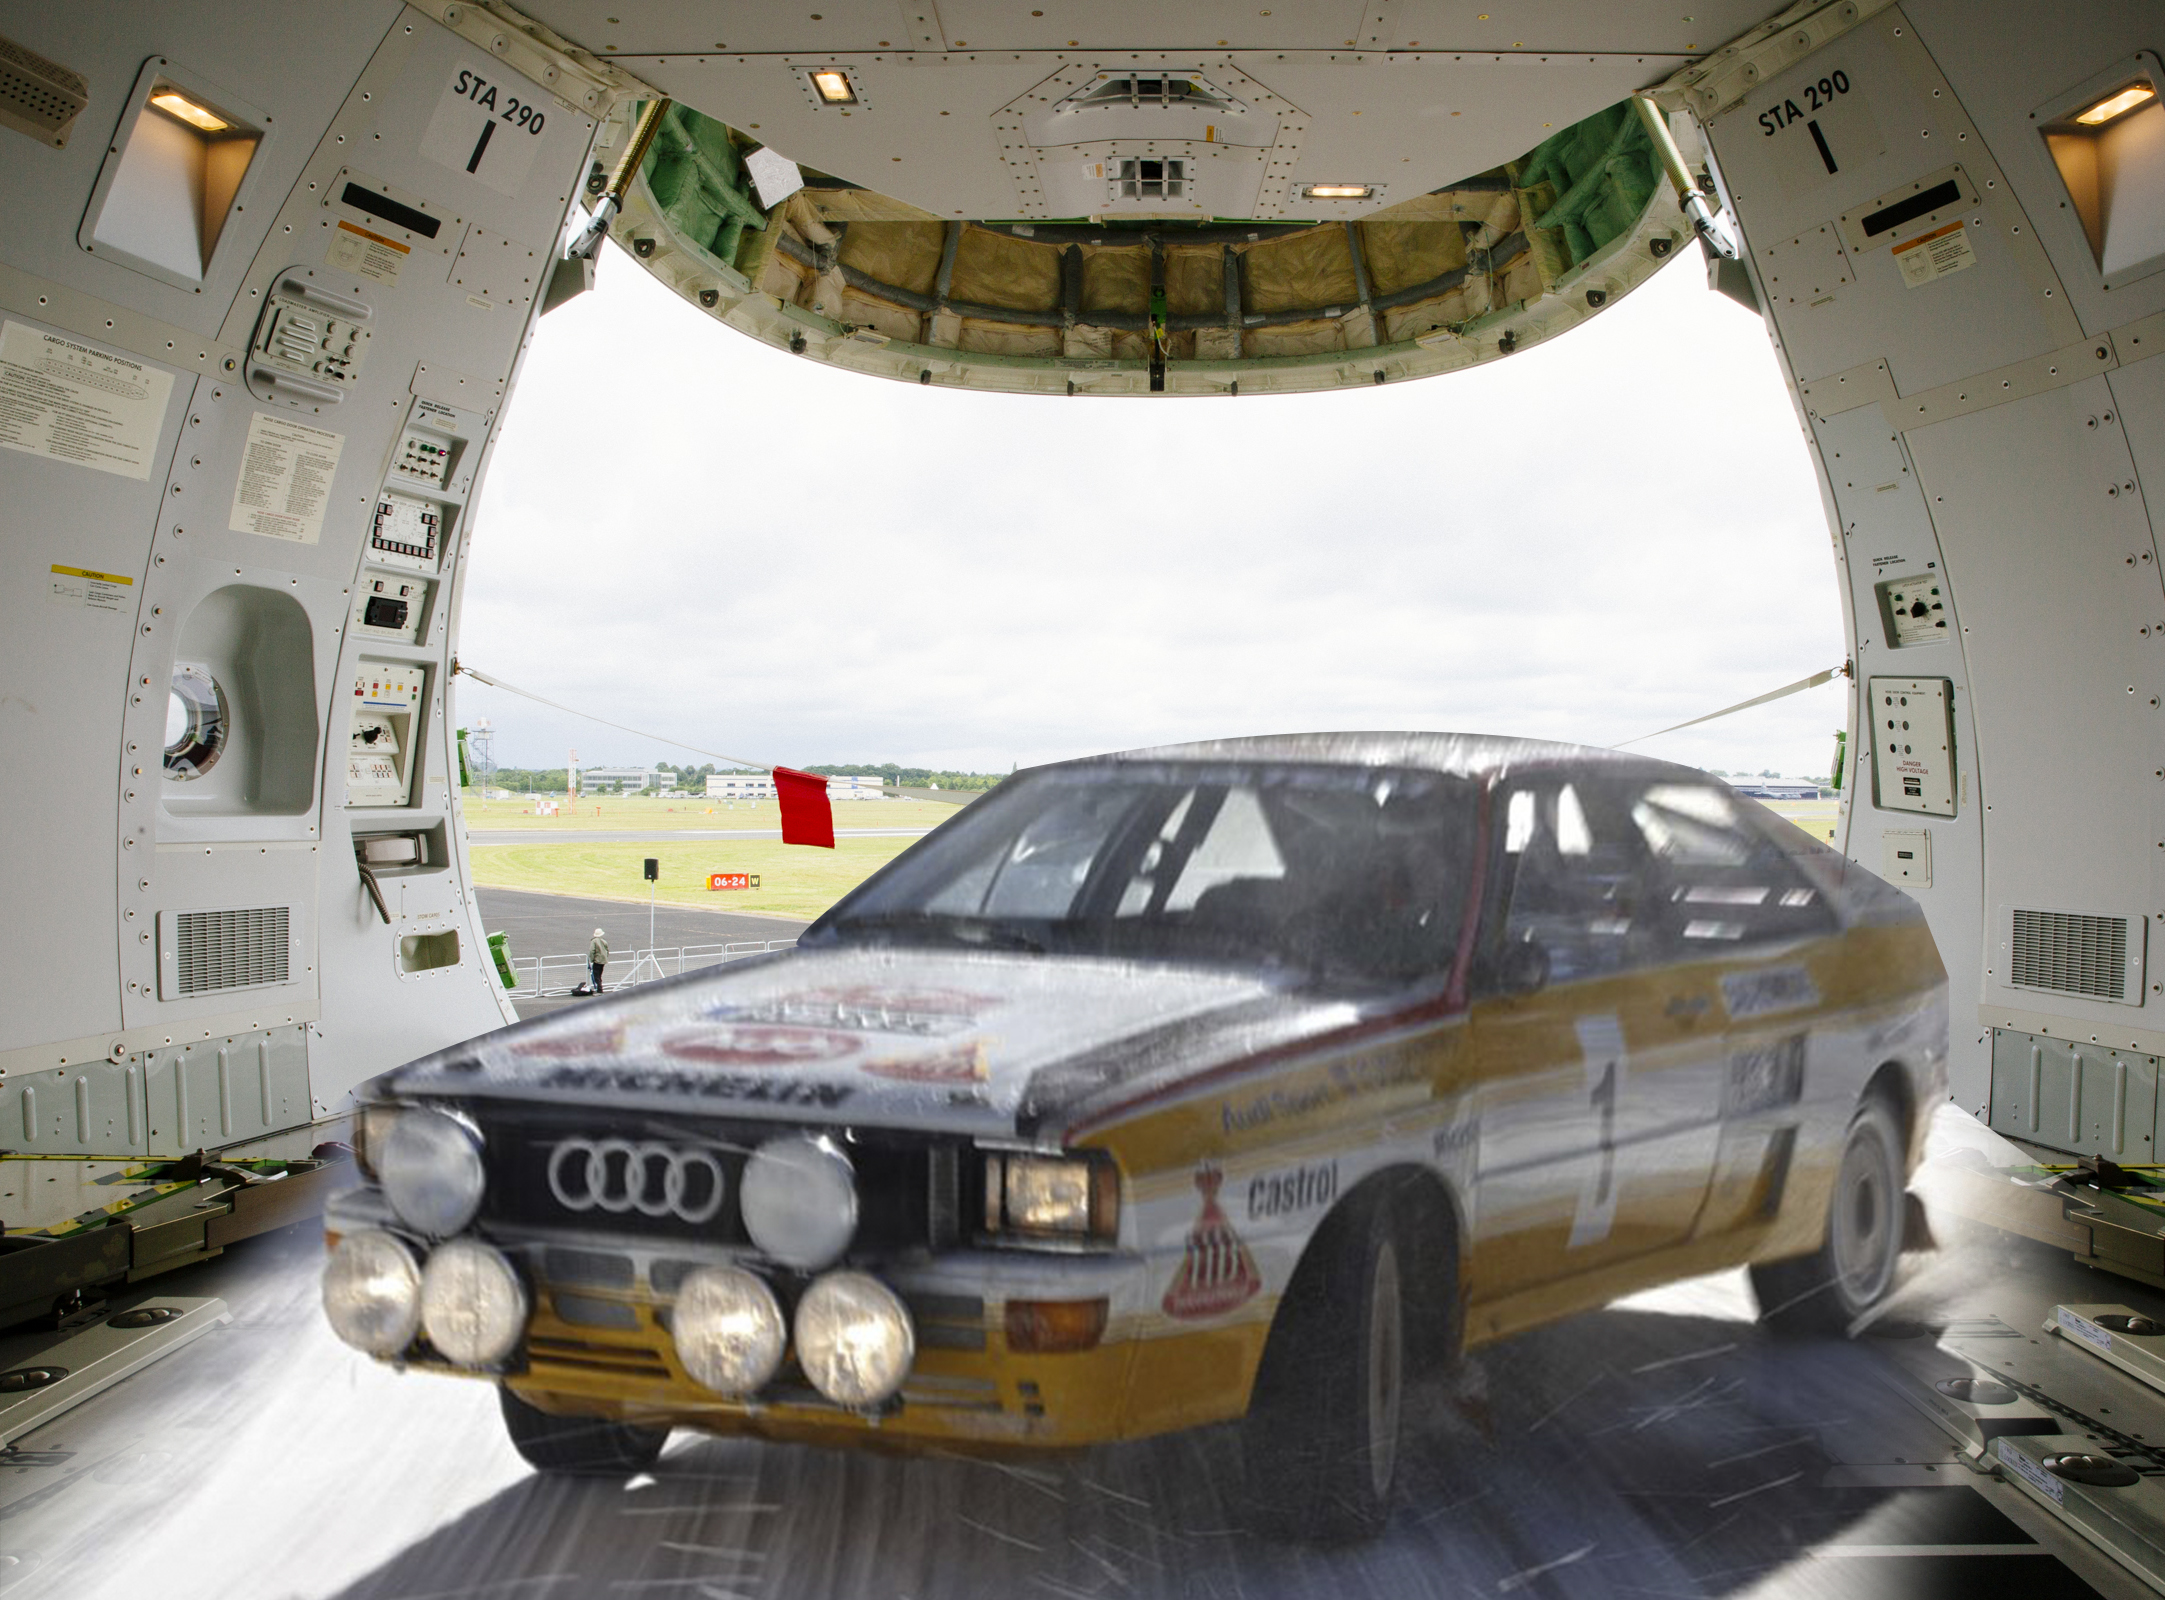 Audi ur-quattro Rally version is flying with an aircraft.